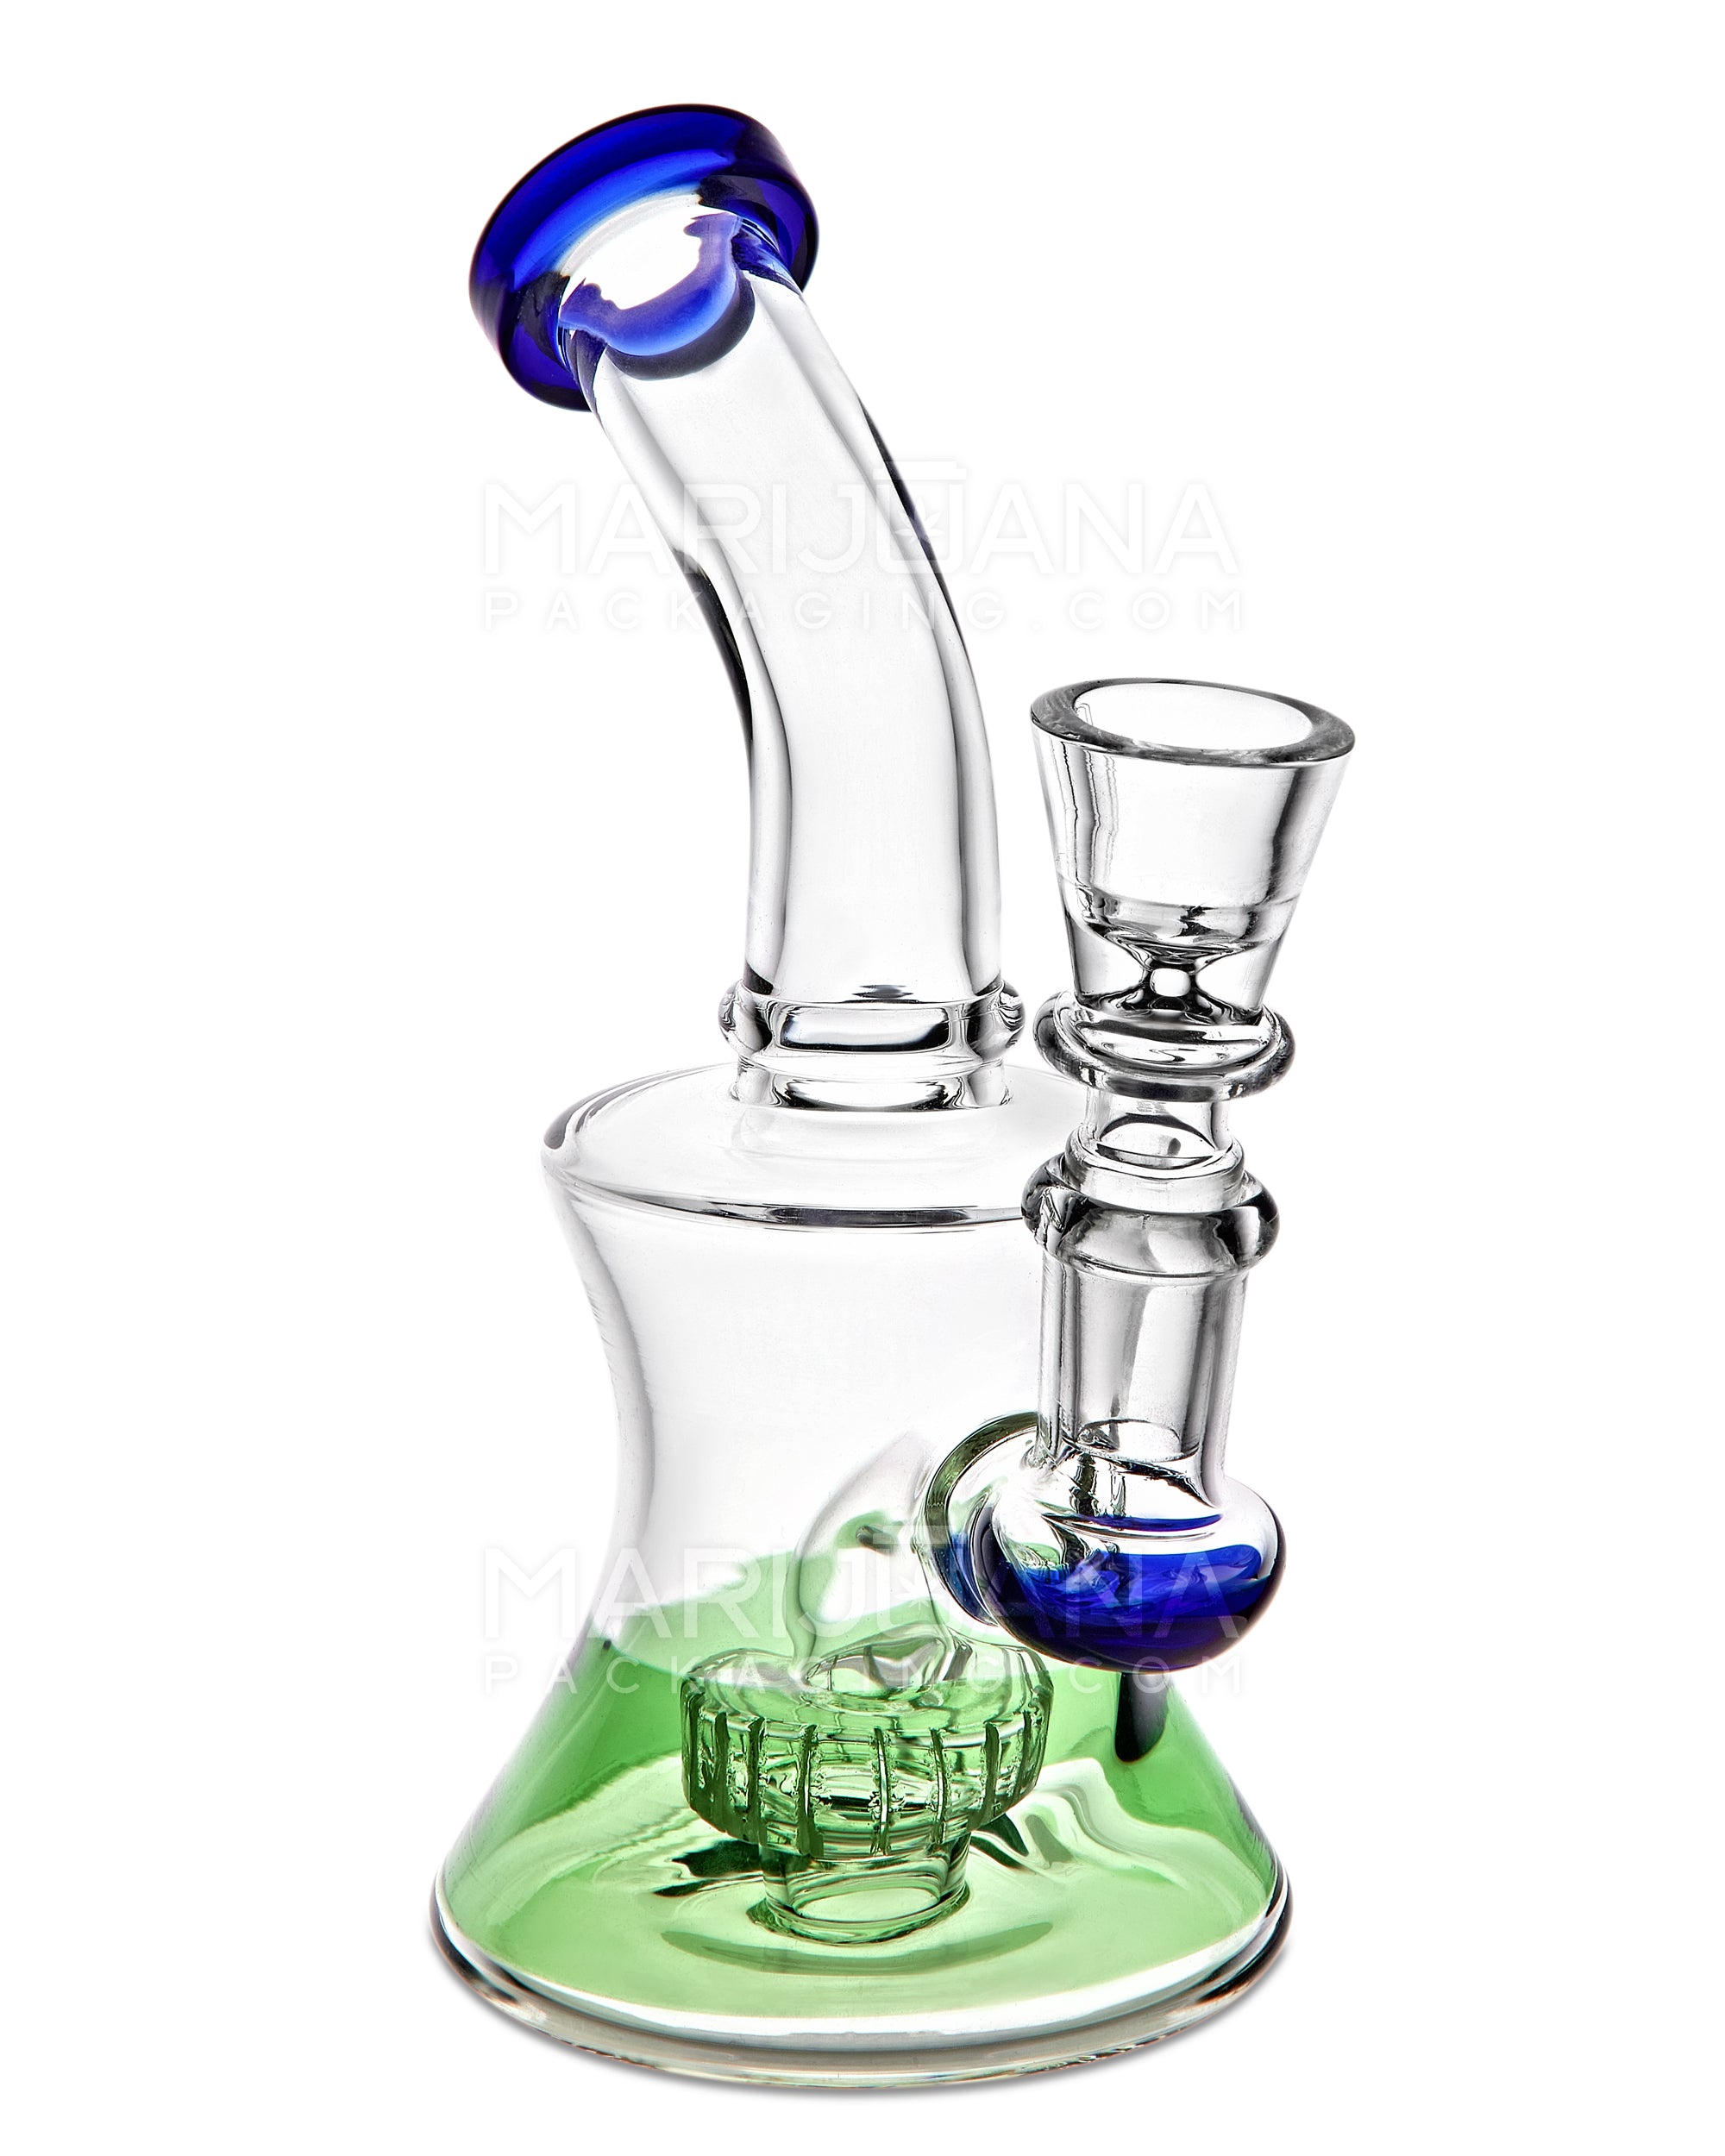 Bent Neck Showerhead Perc Glass Bell Water Pipe | 6.5in Tall - 14mm Bowl - Blue & Green - 4